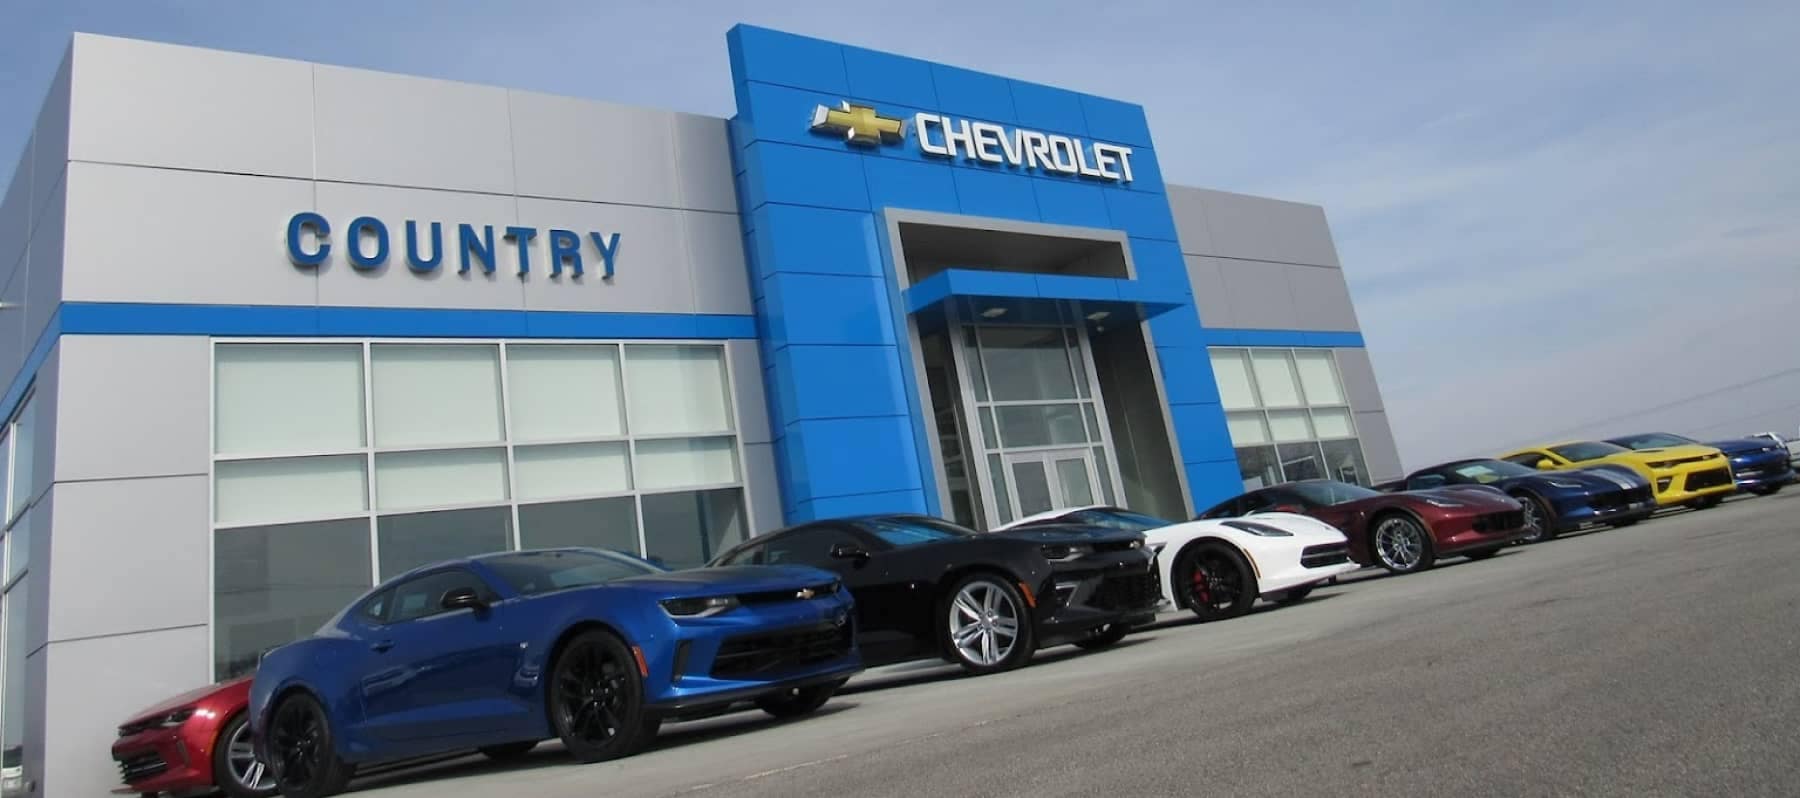 view of Country Chevrolet from outside the dealership